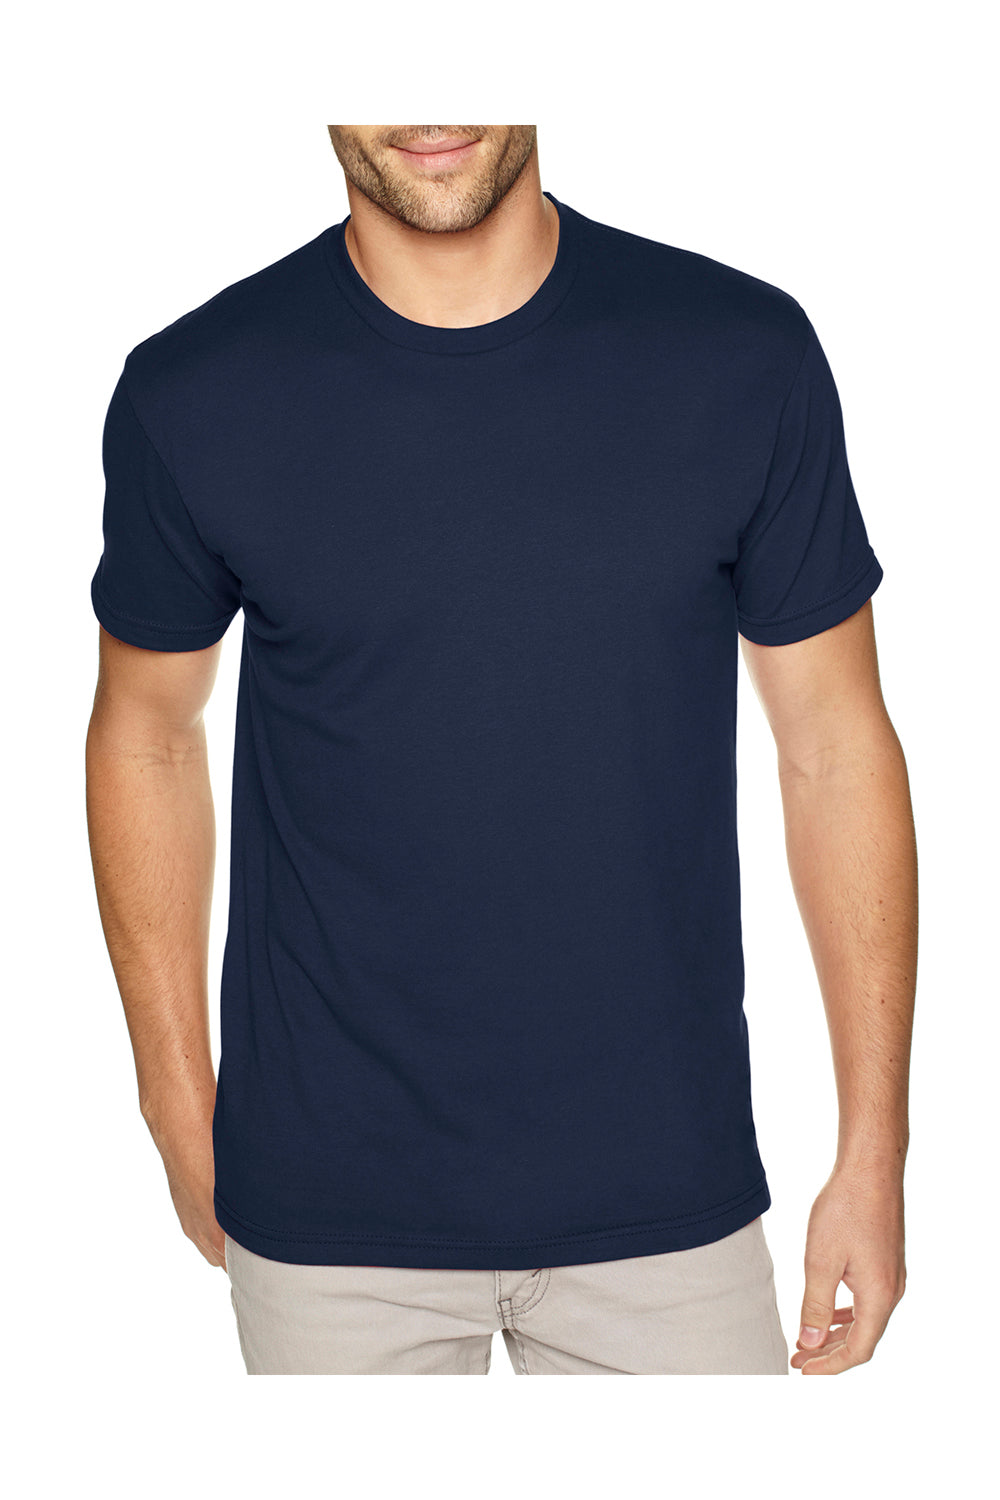 Next Level 6410 Mens Sueded Jersey Short Sleeve Crewneck T-Shirt Navy Blue Front